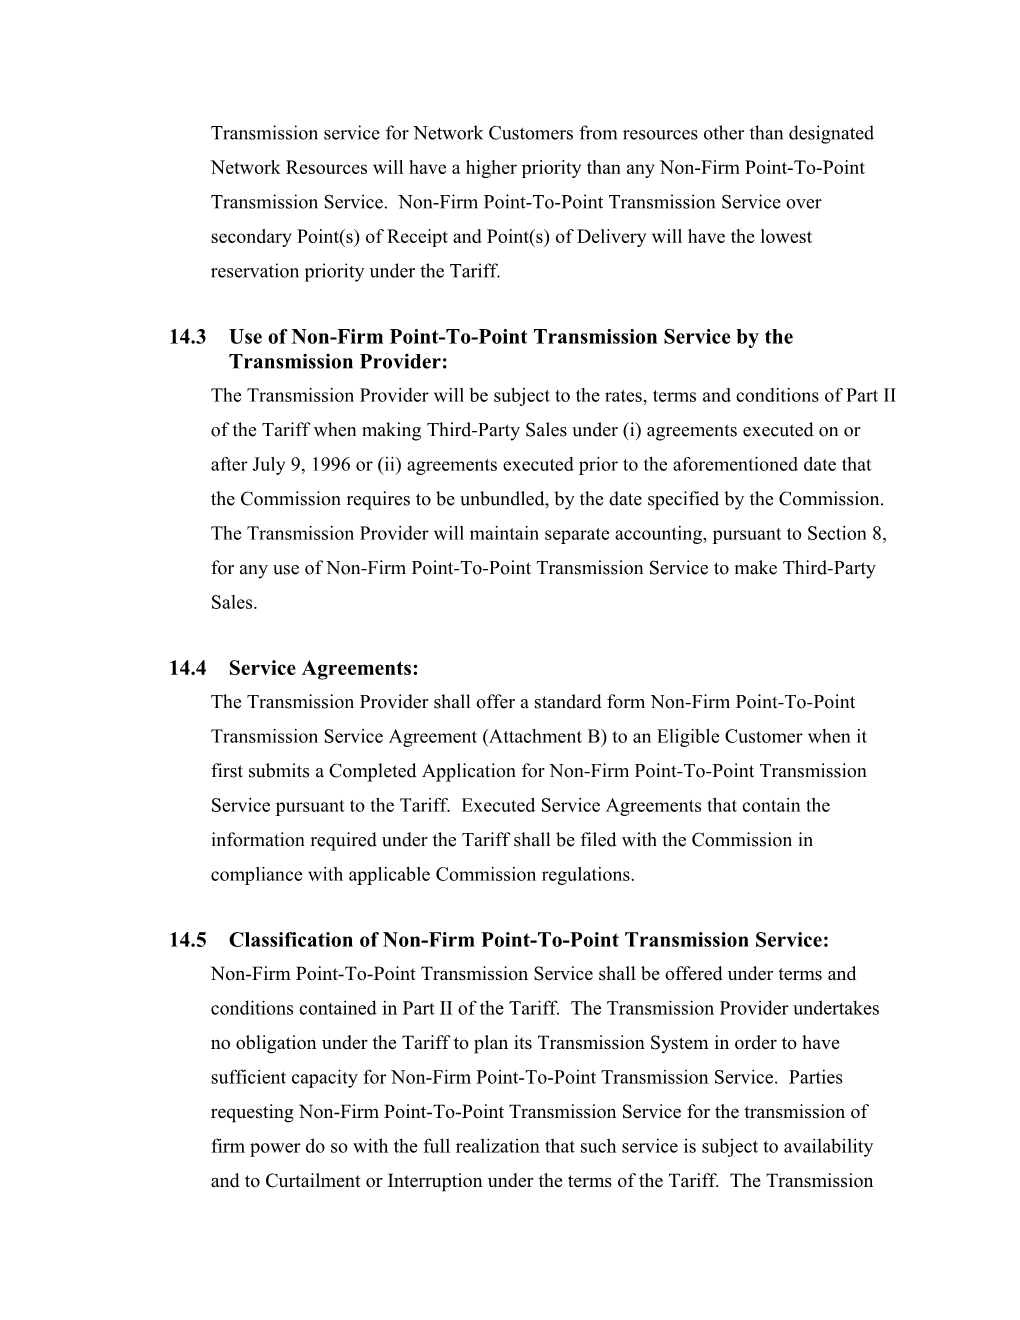 14Nature of Non-Firm Point-To-Point Transmission Service